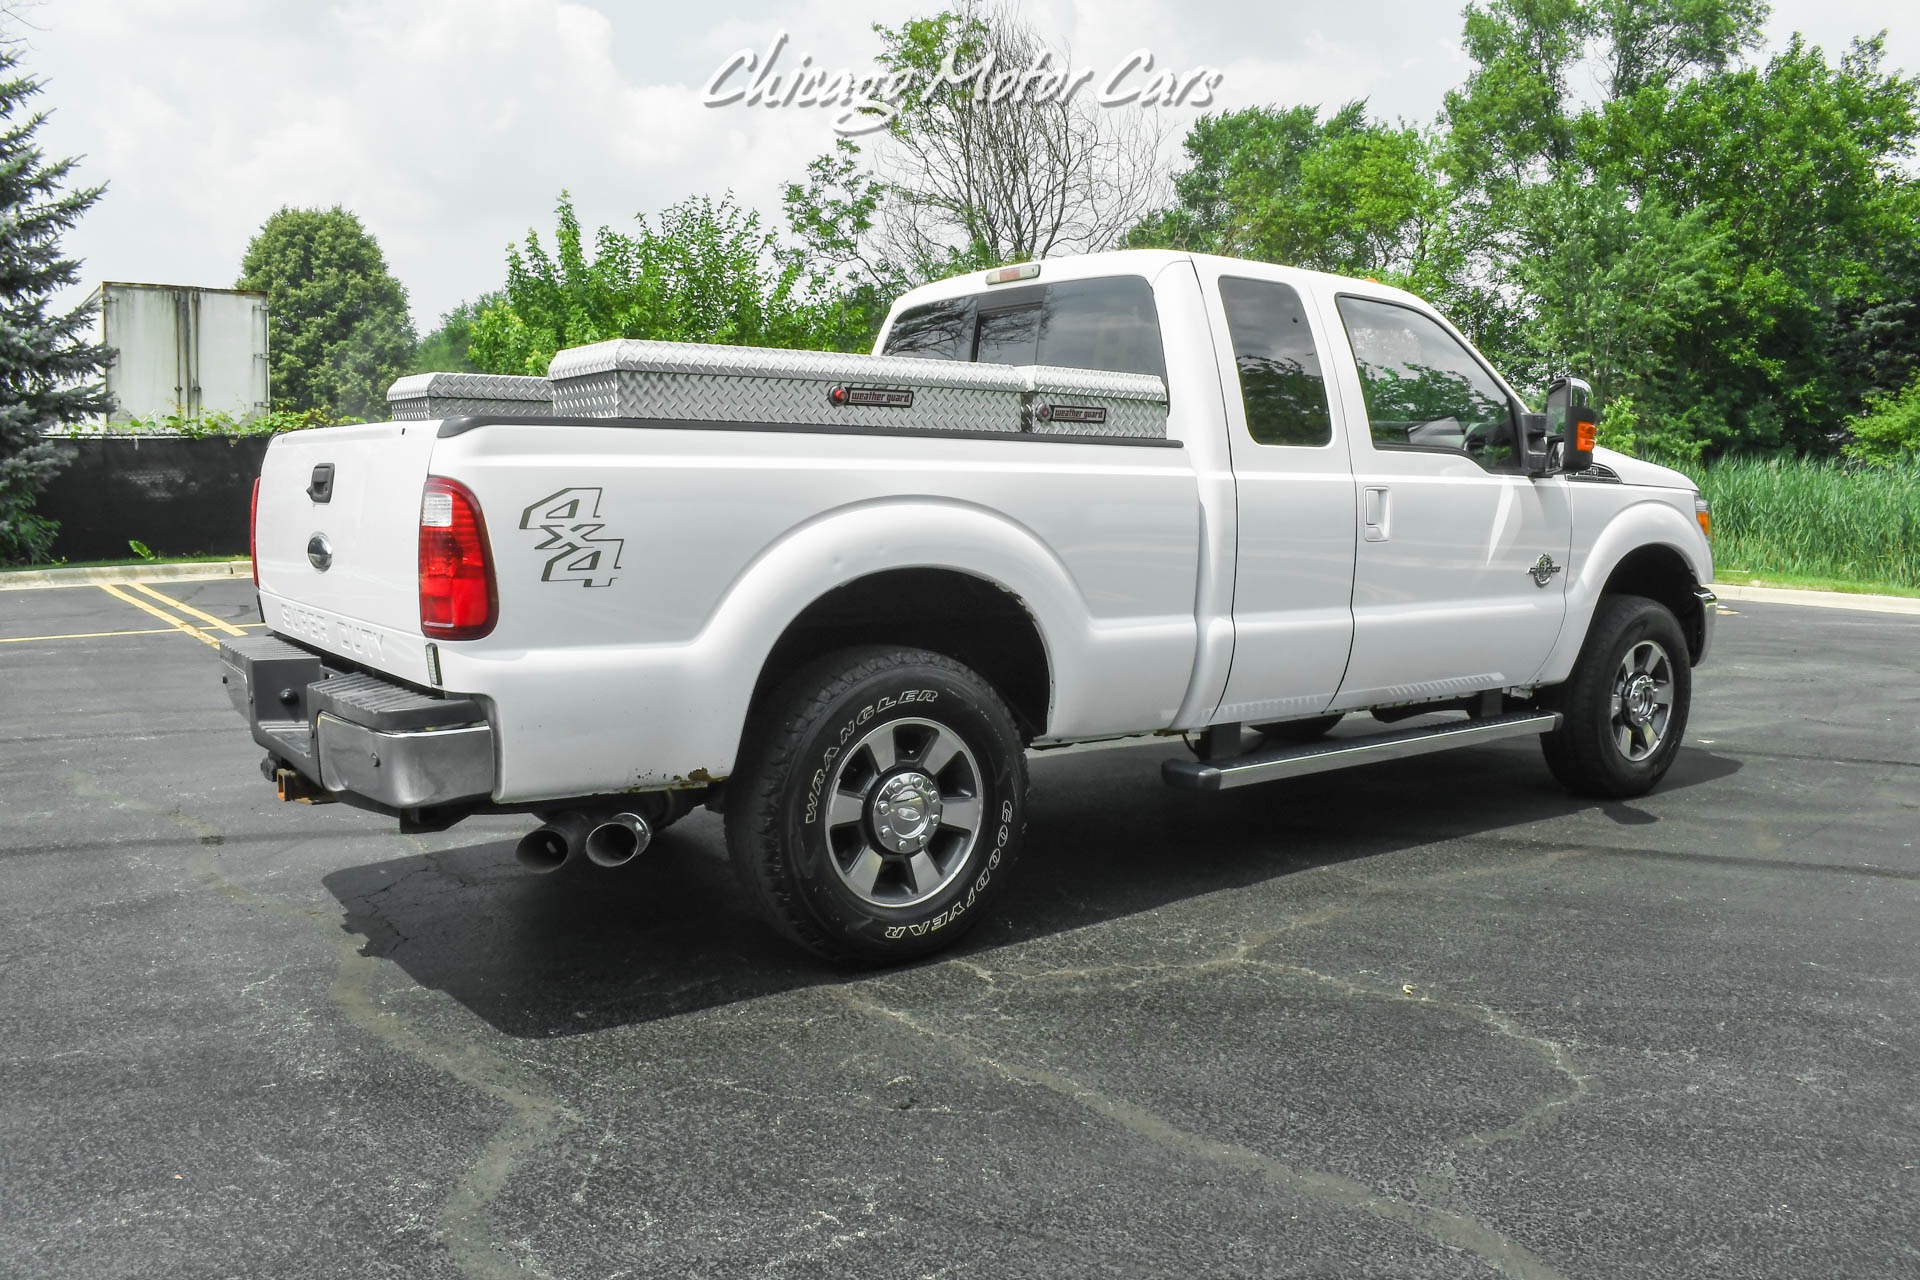 Used-2011-Ford-F-250-Super-Duty-Lariat-4x4-POWERSTROKE-DIESEL-ONE-OWNER-EXTREMELY-CLEAN